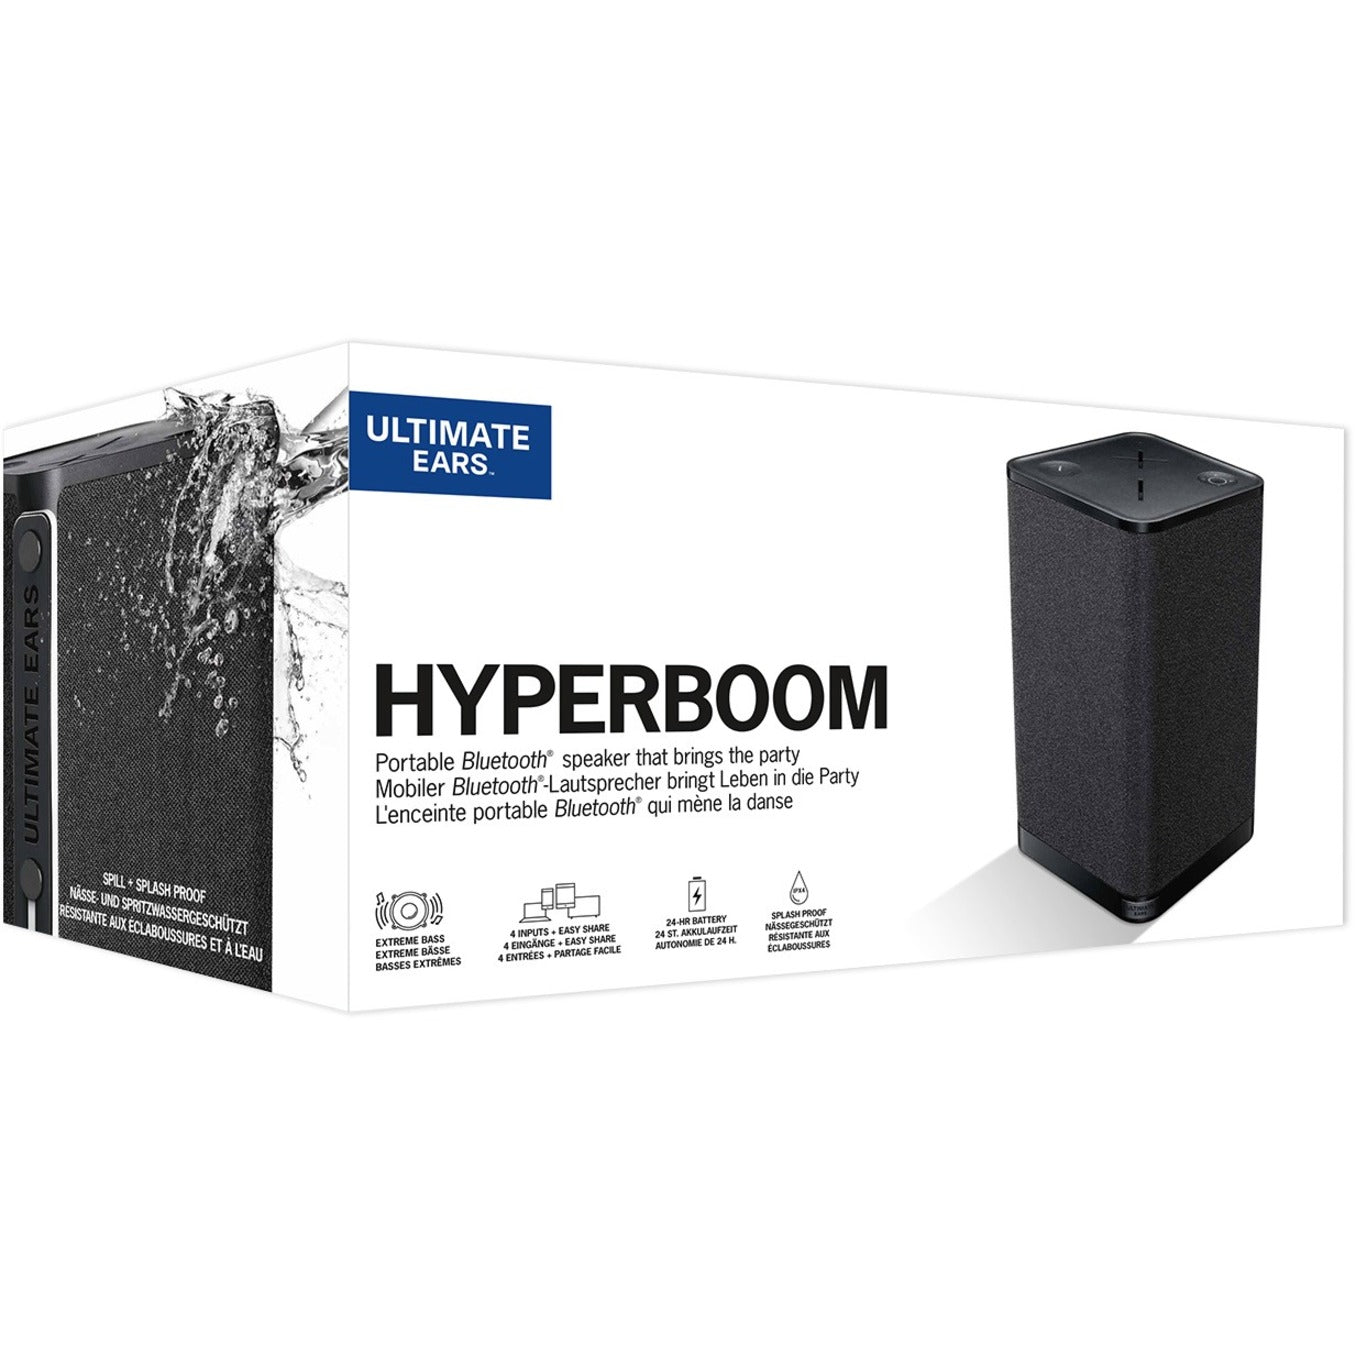 Ultimate Ears 984-001591 HYPERBOOM Speaker System, Portable Bluetooth Speaker with Wireless Audio Stream, USB Charging Port, and High Fidelity Stereo